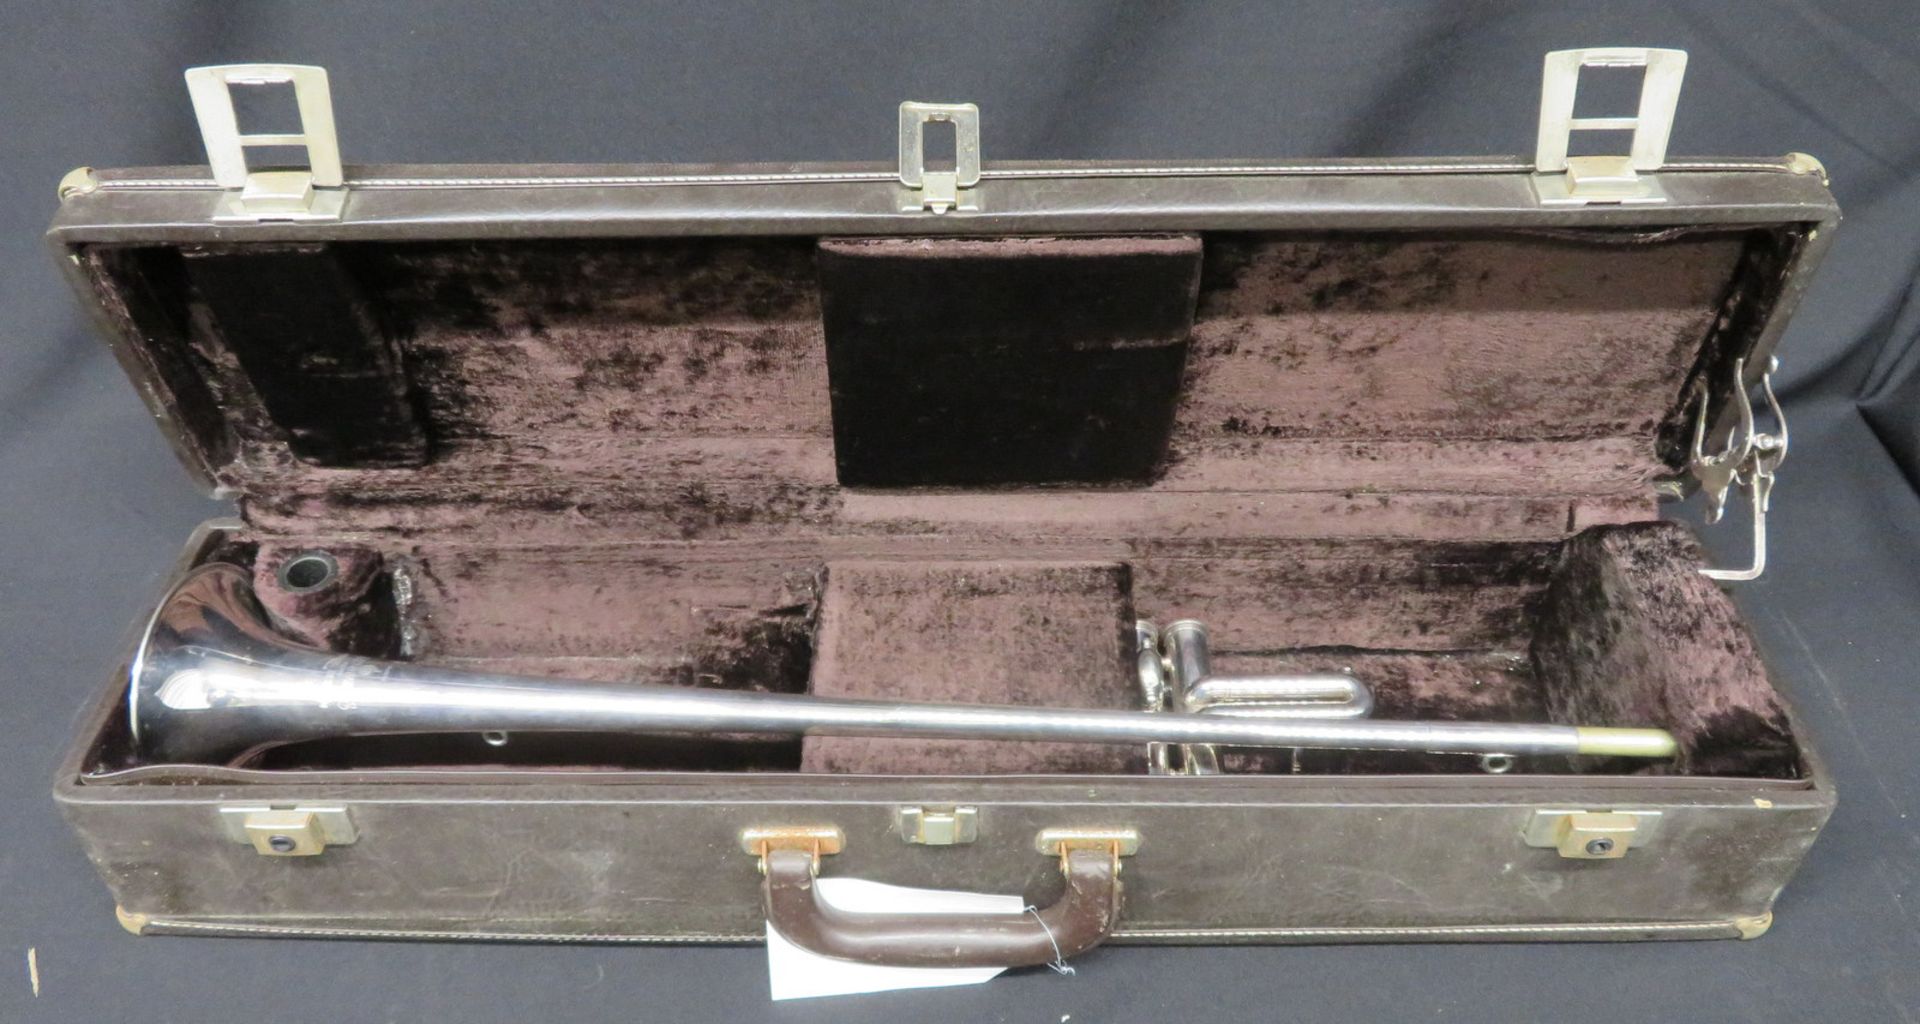 Boosey & Hawkes Imperial Besson fanfare trumpet with case. Serial number: 706-702334.